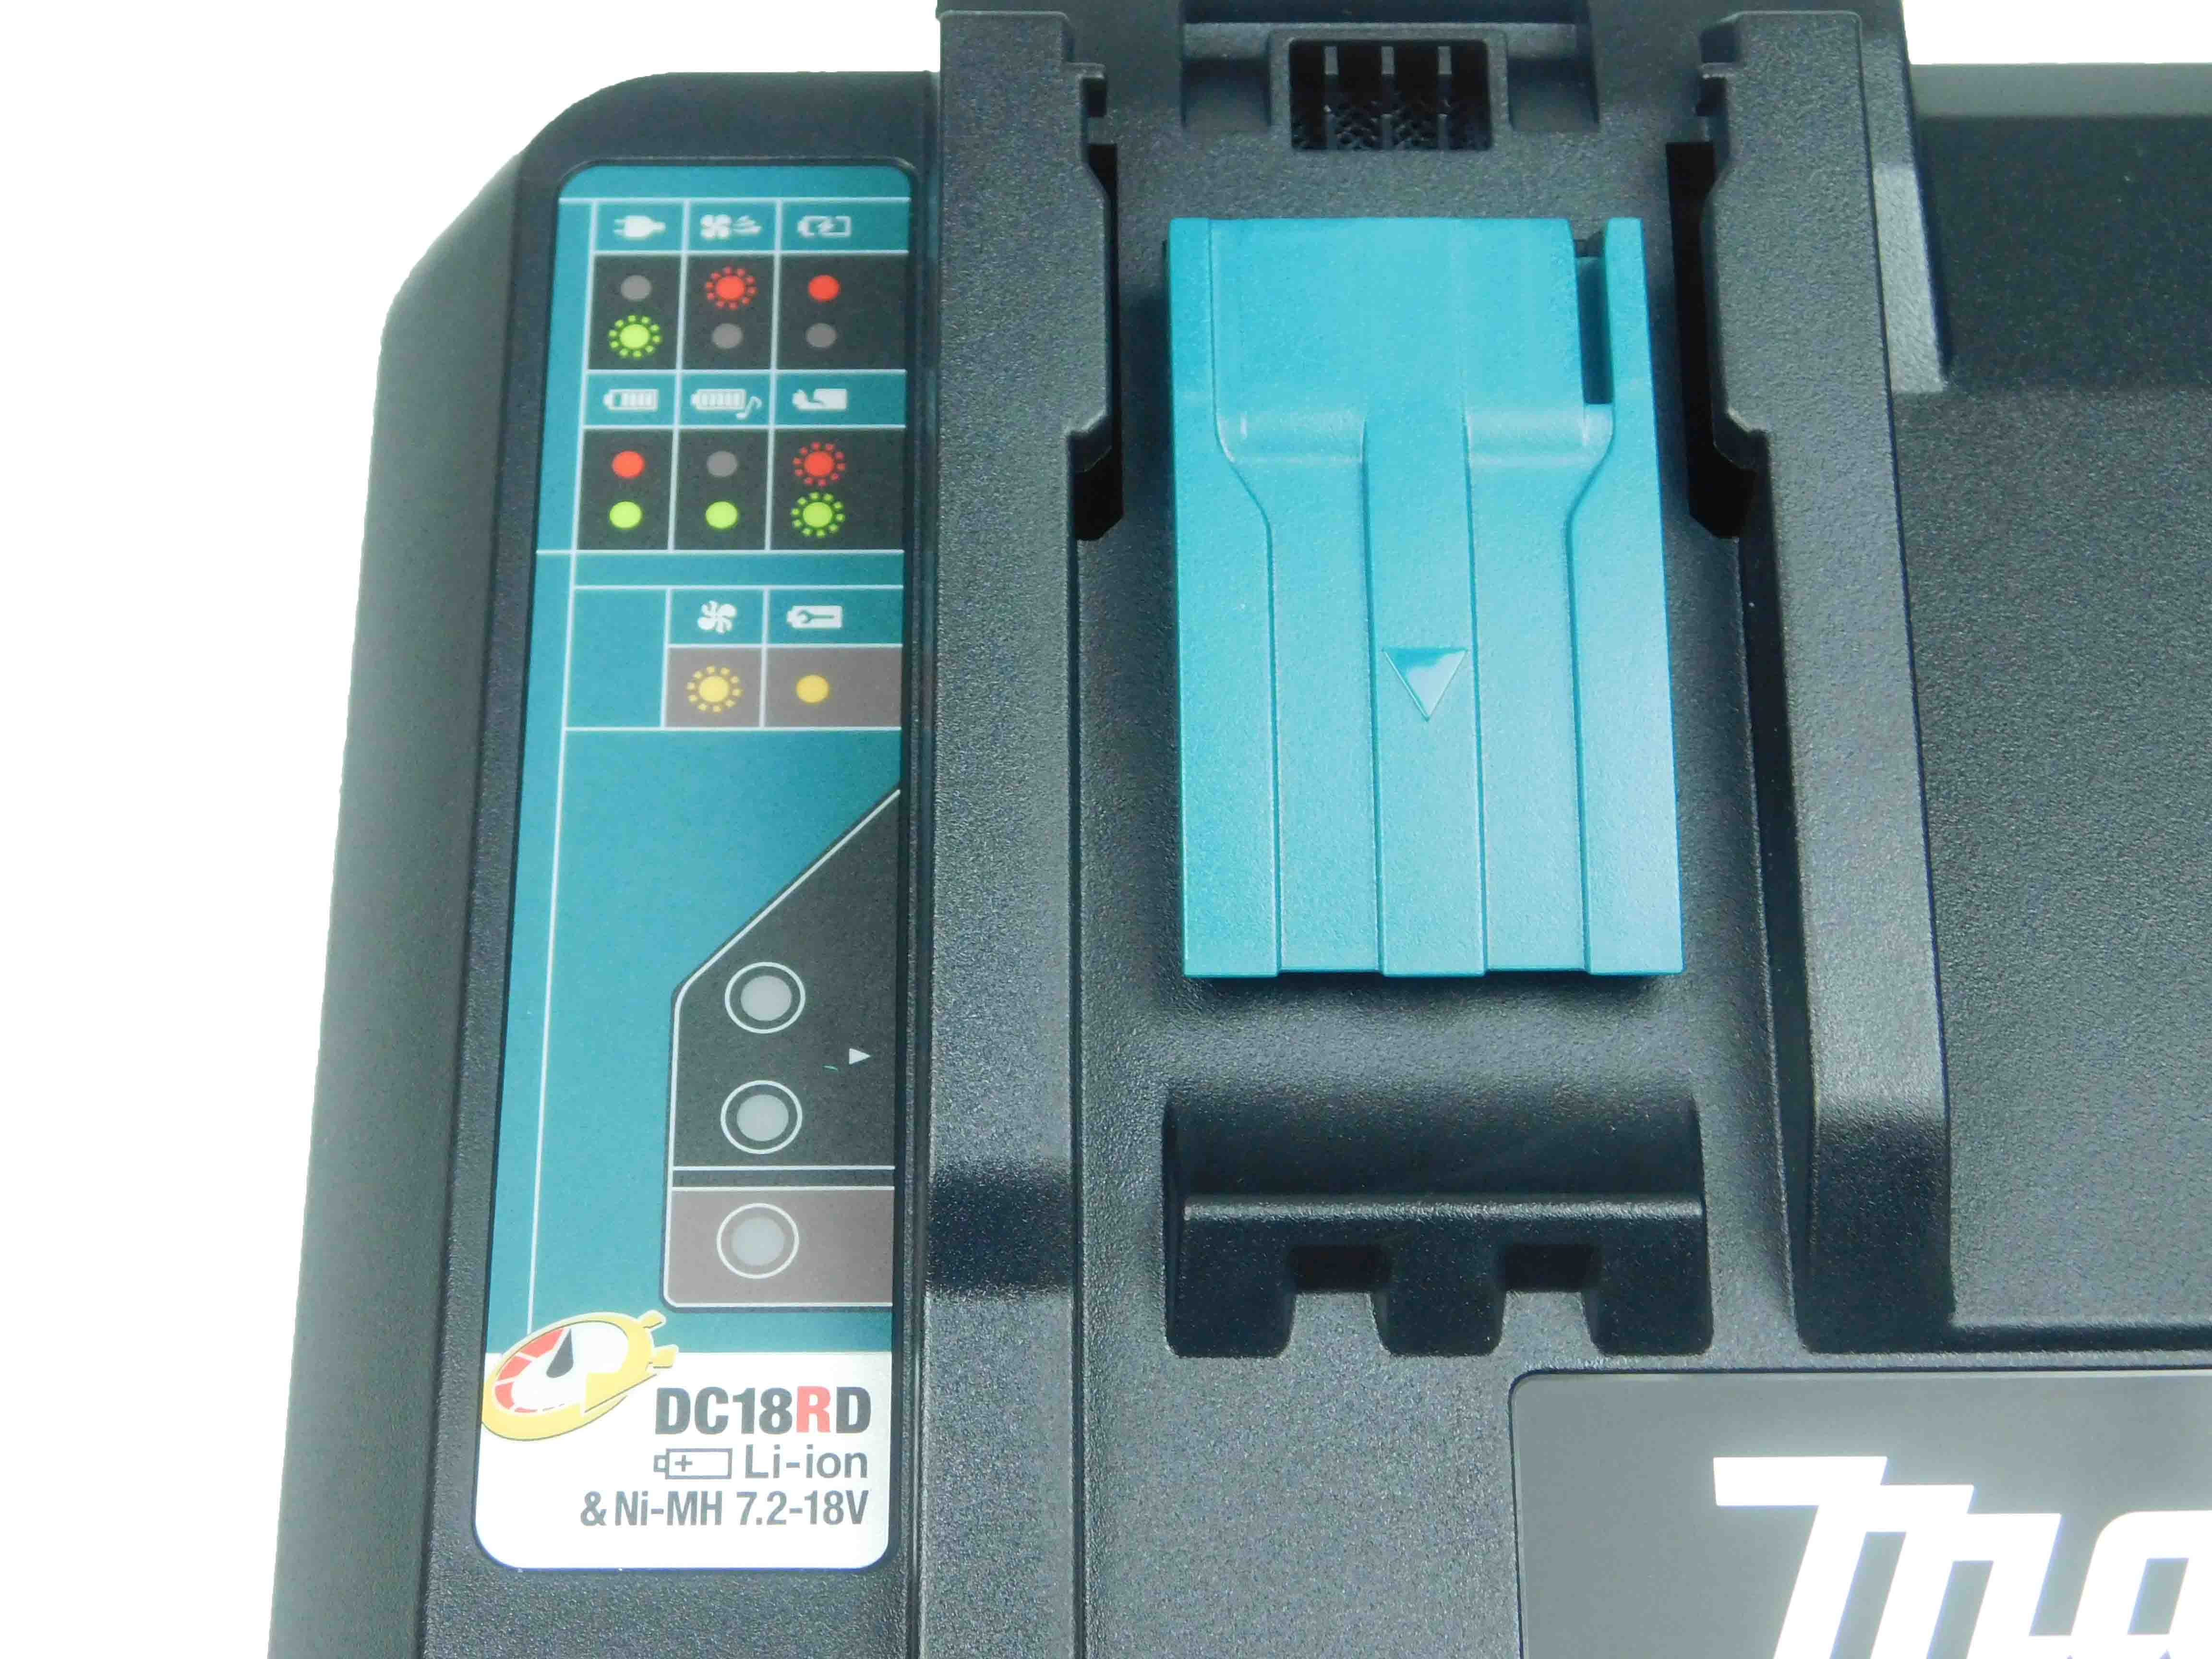 Makita DC18RD 18V Lithium-Ion Dual Port Rapid Optimum Charger with USB Port